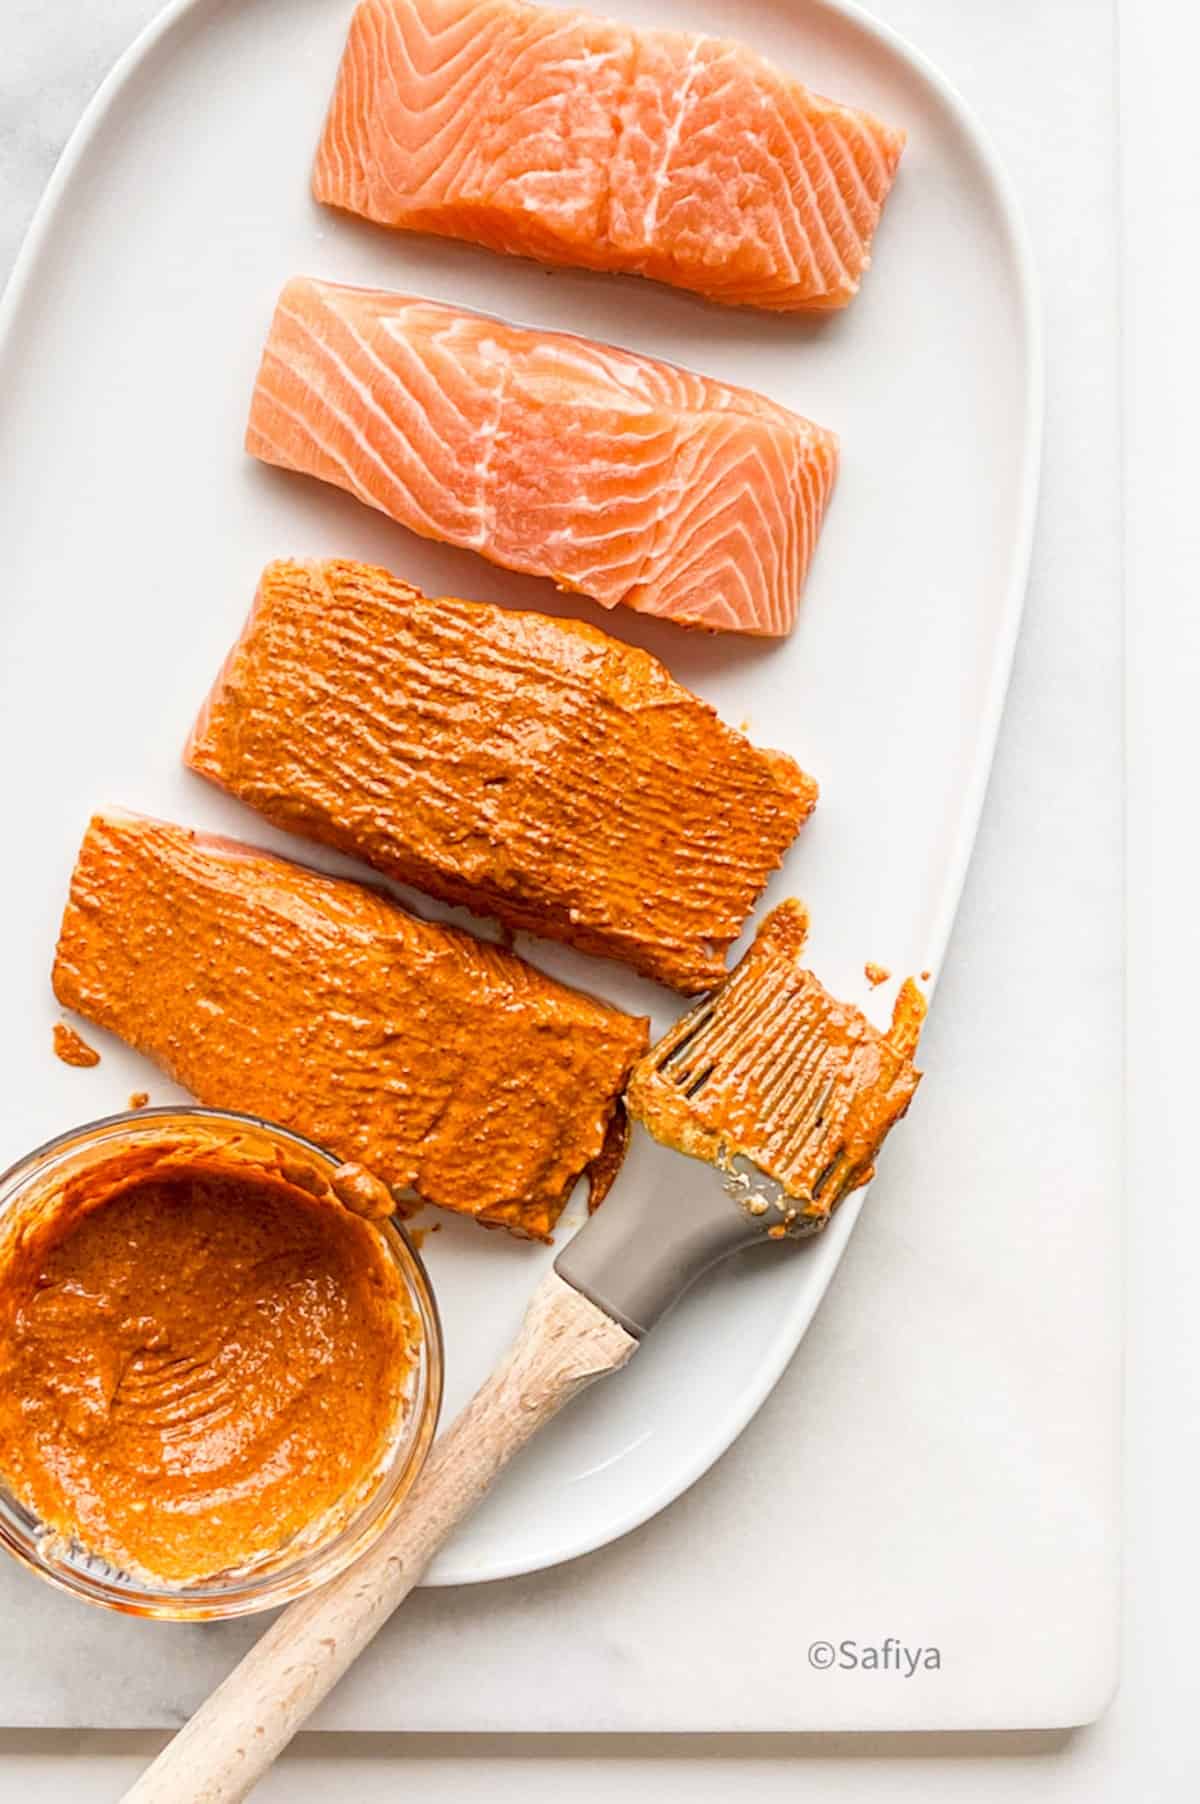 salmon portions brushed with orange marinade